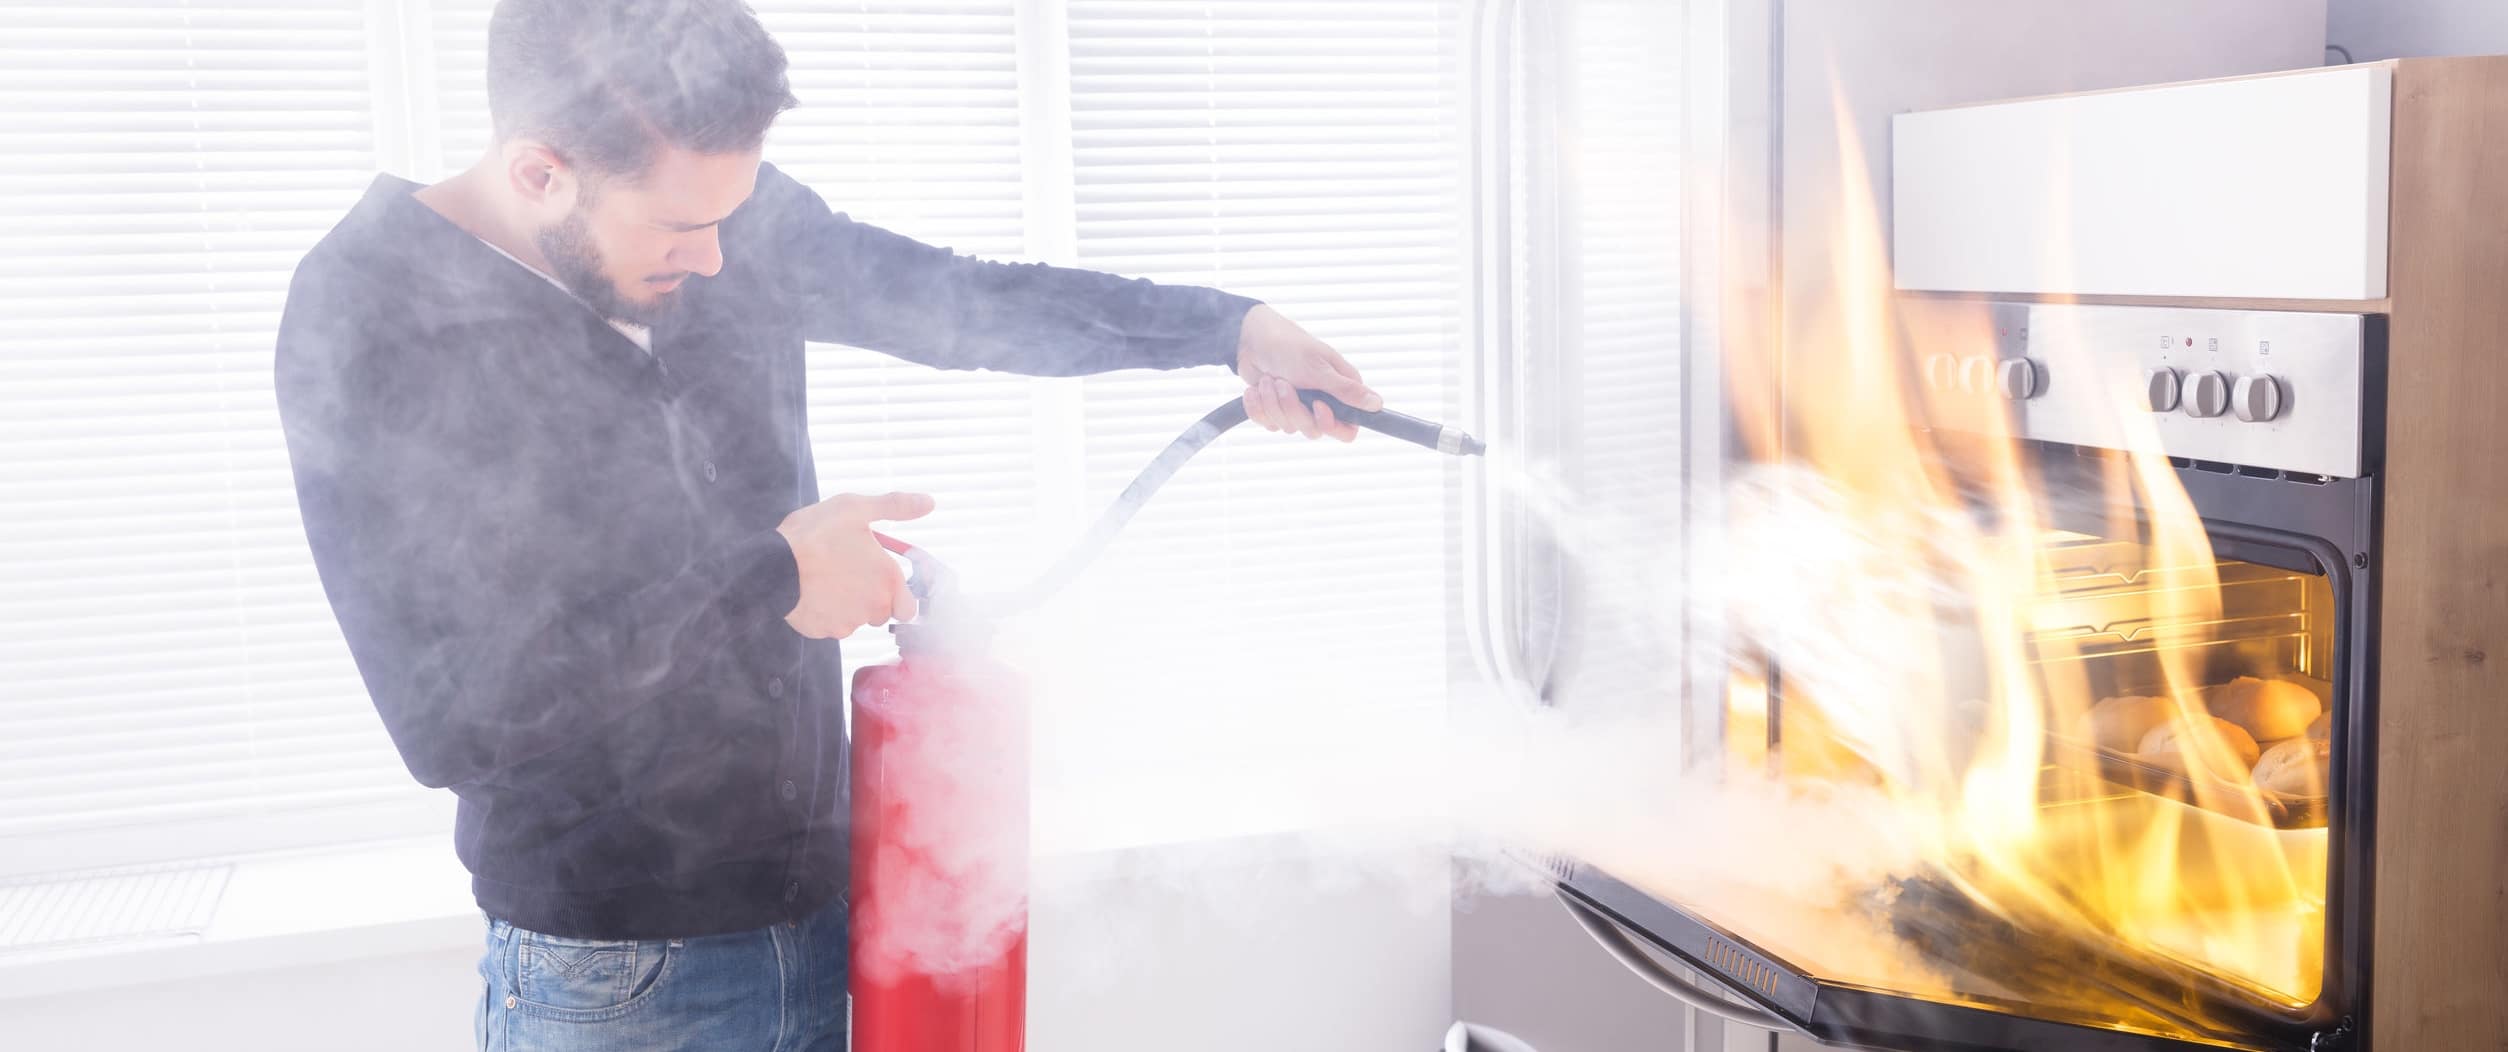 Man using extinguisher to put out oven fire